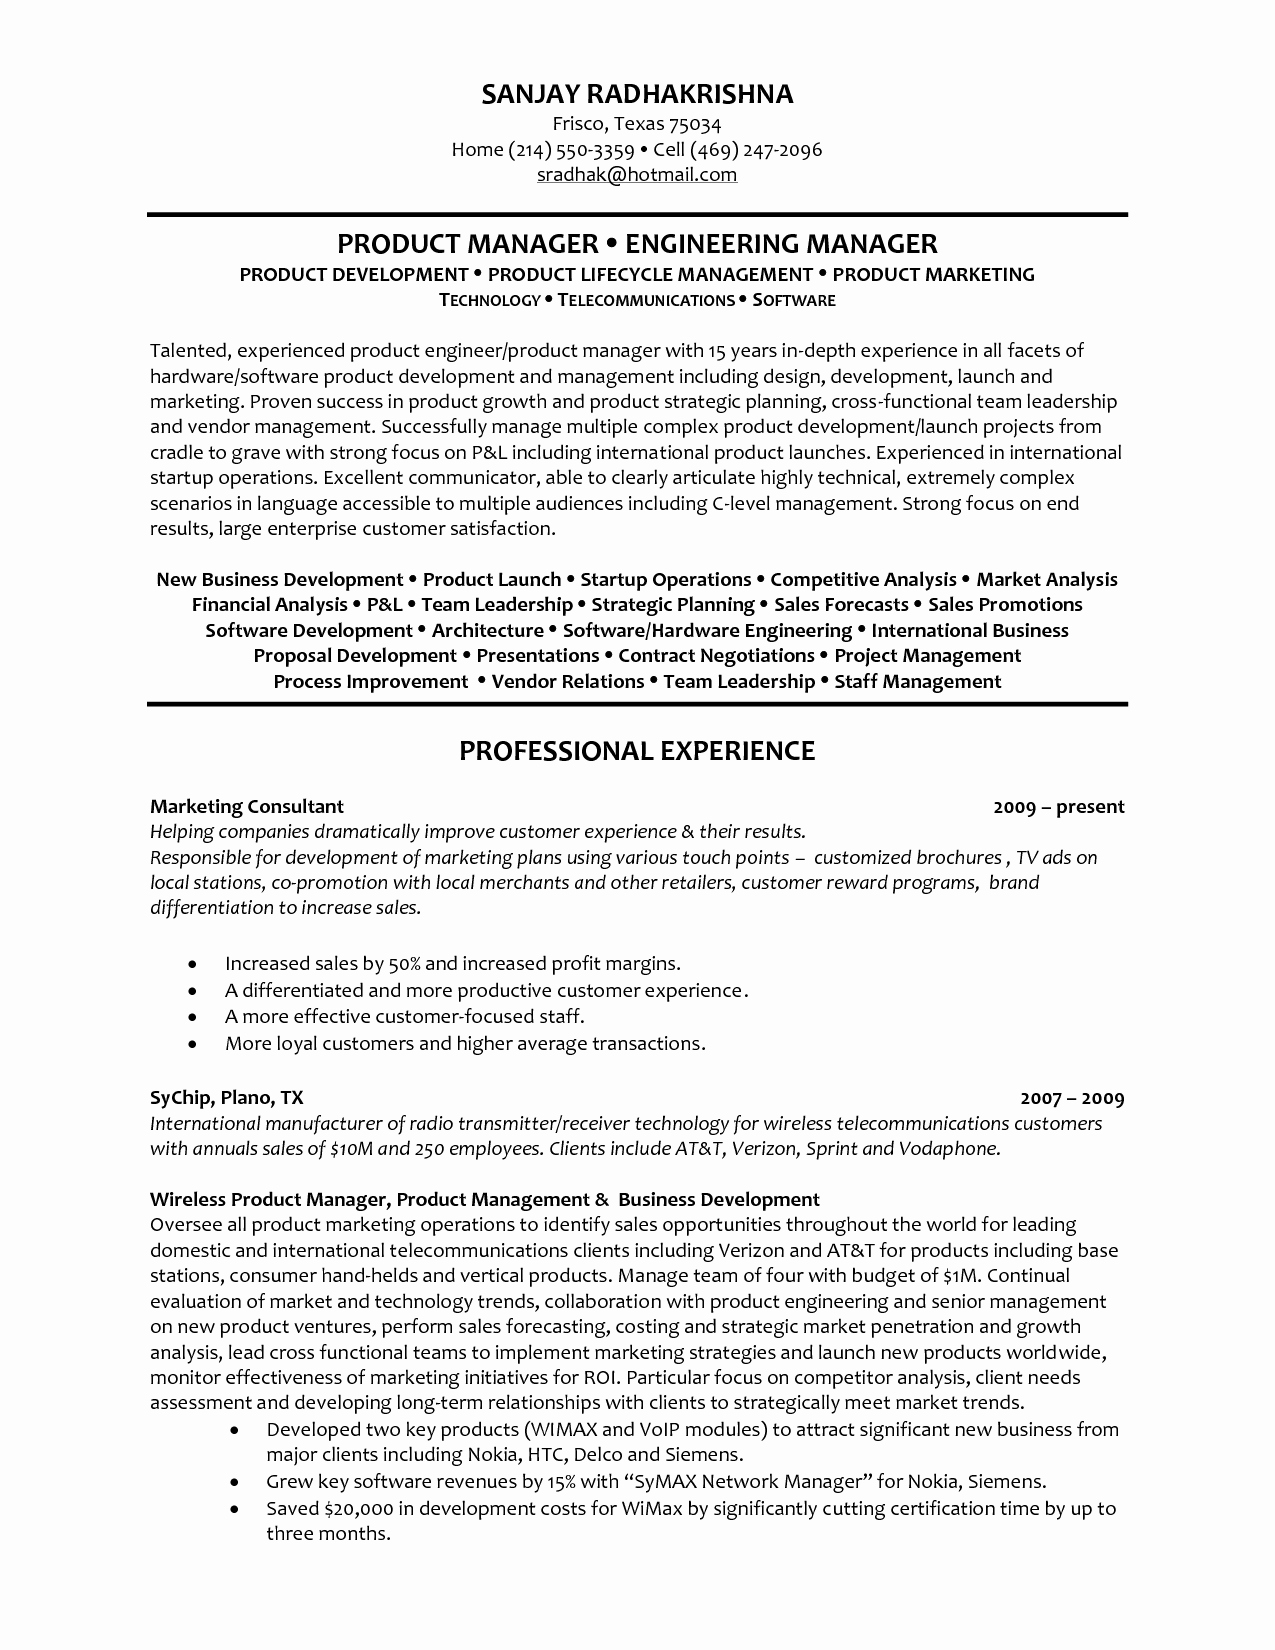 Product Manager Resume Objective Project Skills for